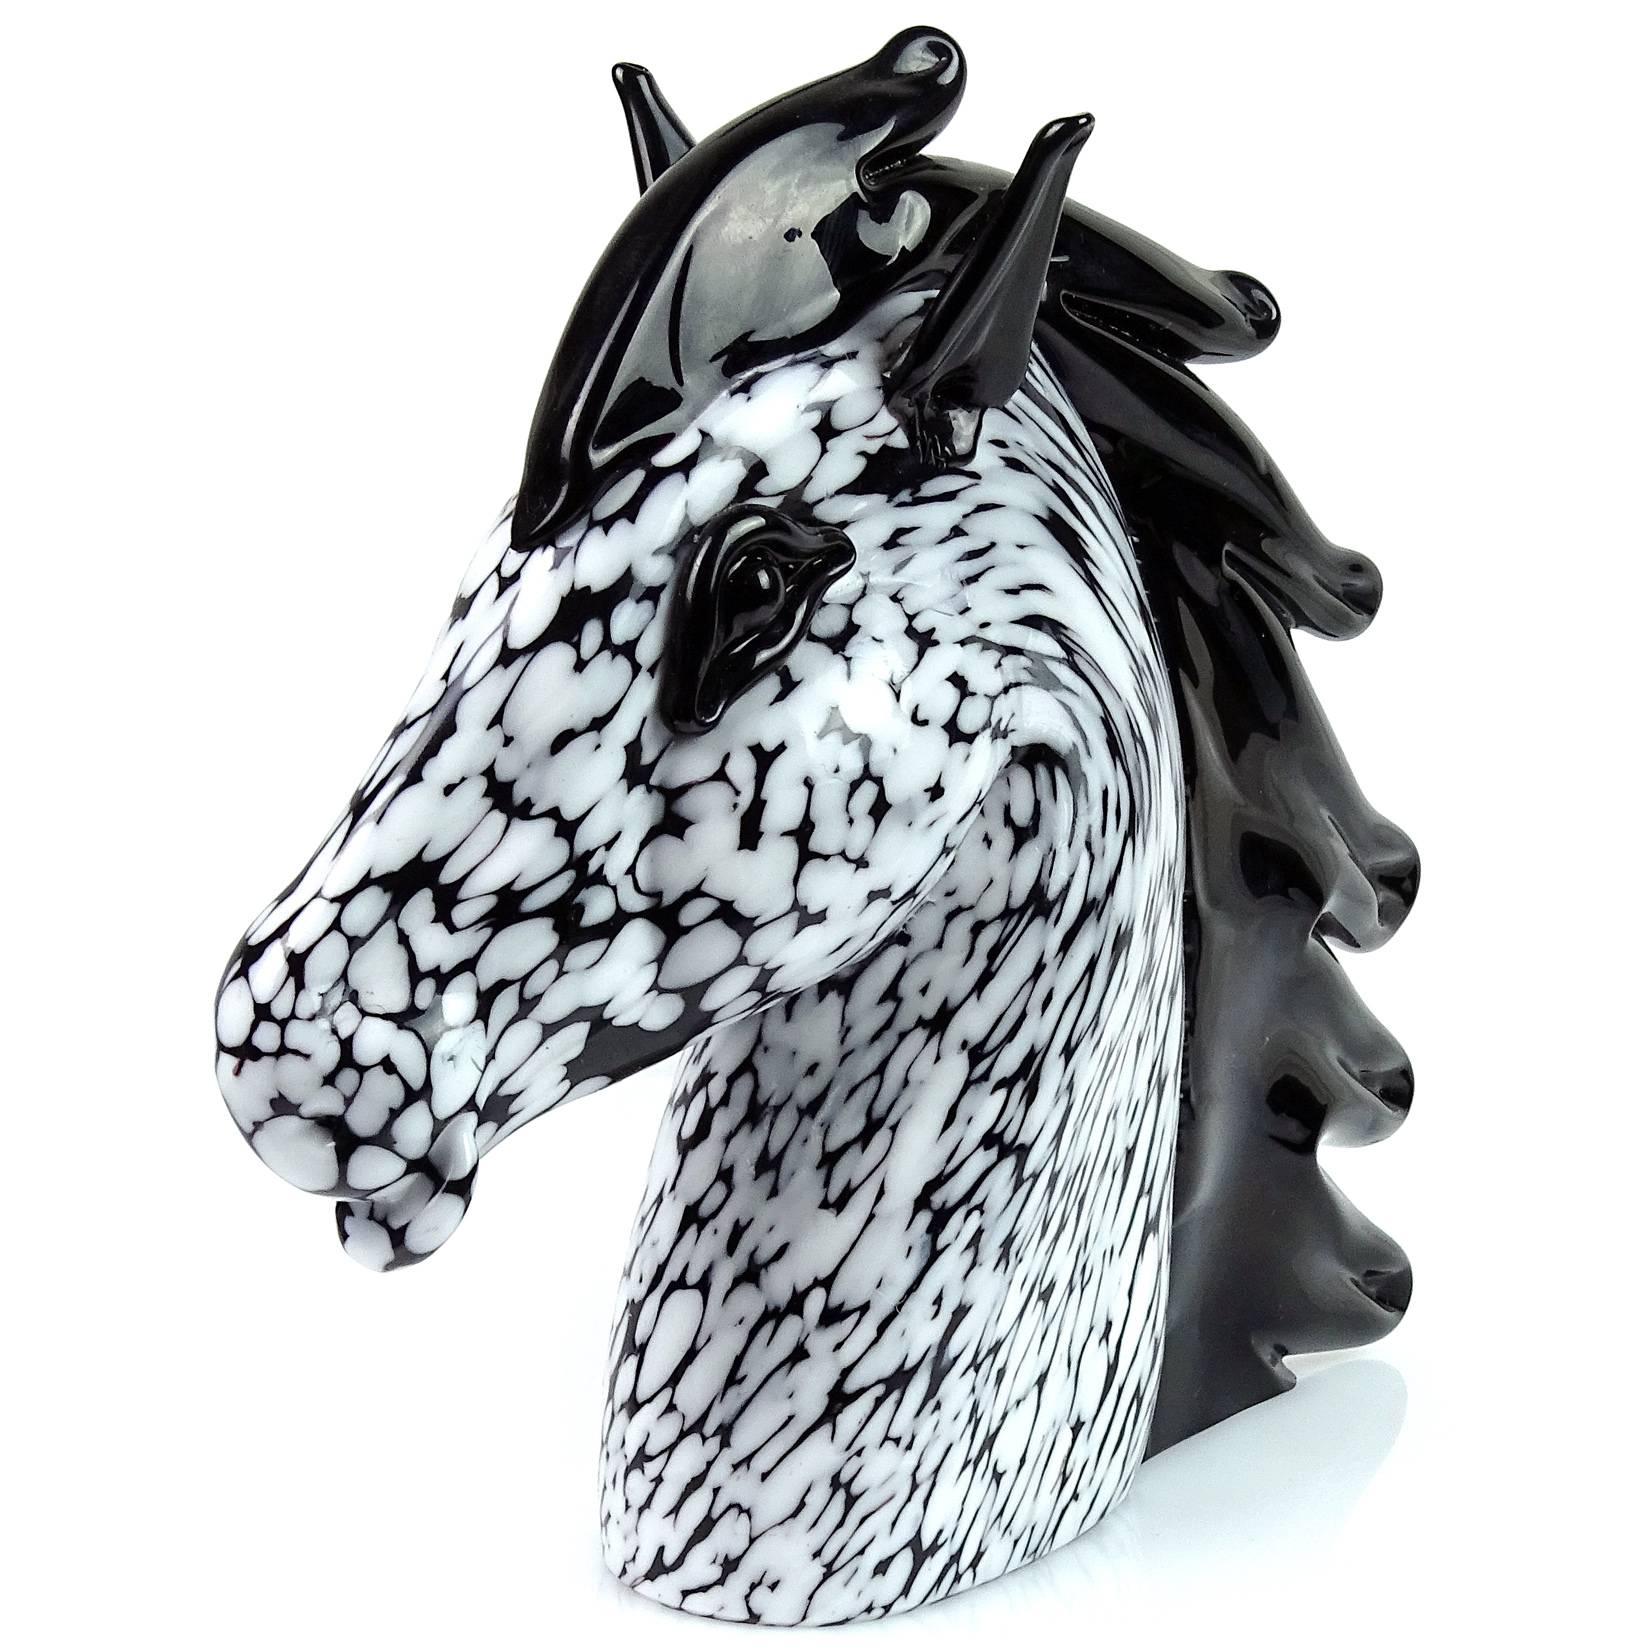 Beautiful vintage Murano hand blown black and white spotted Italian art glass horse head sculpture. Documented to designer Archimede Seguso, from the 